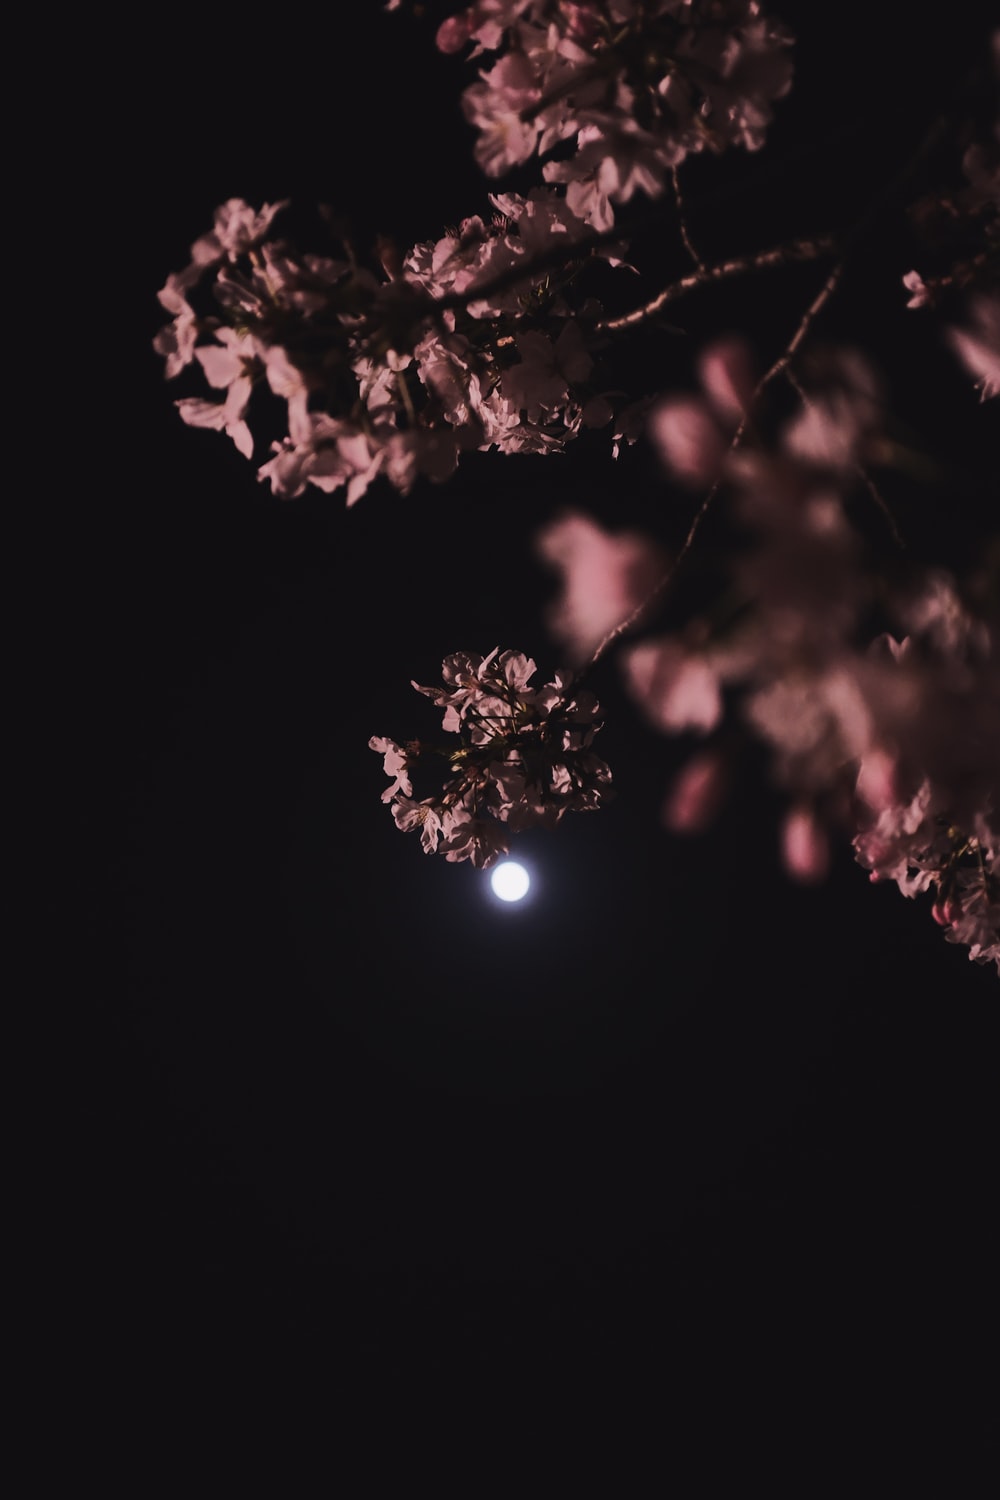 Flower Moon Picture. Download Free Image